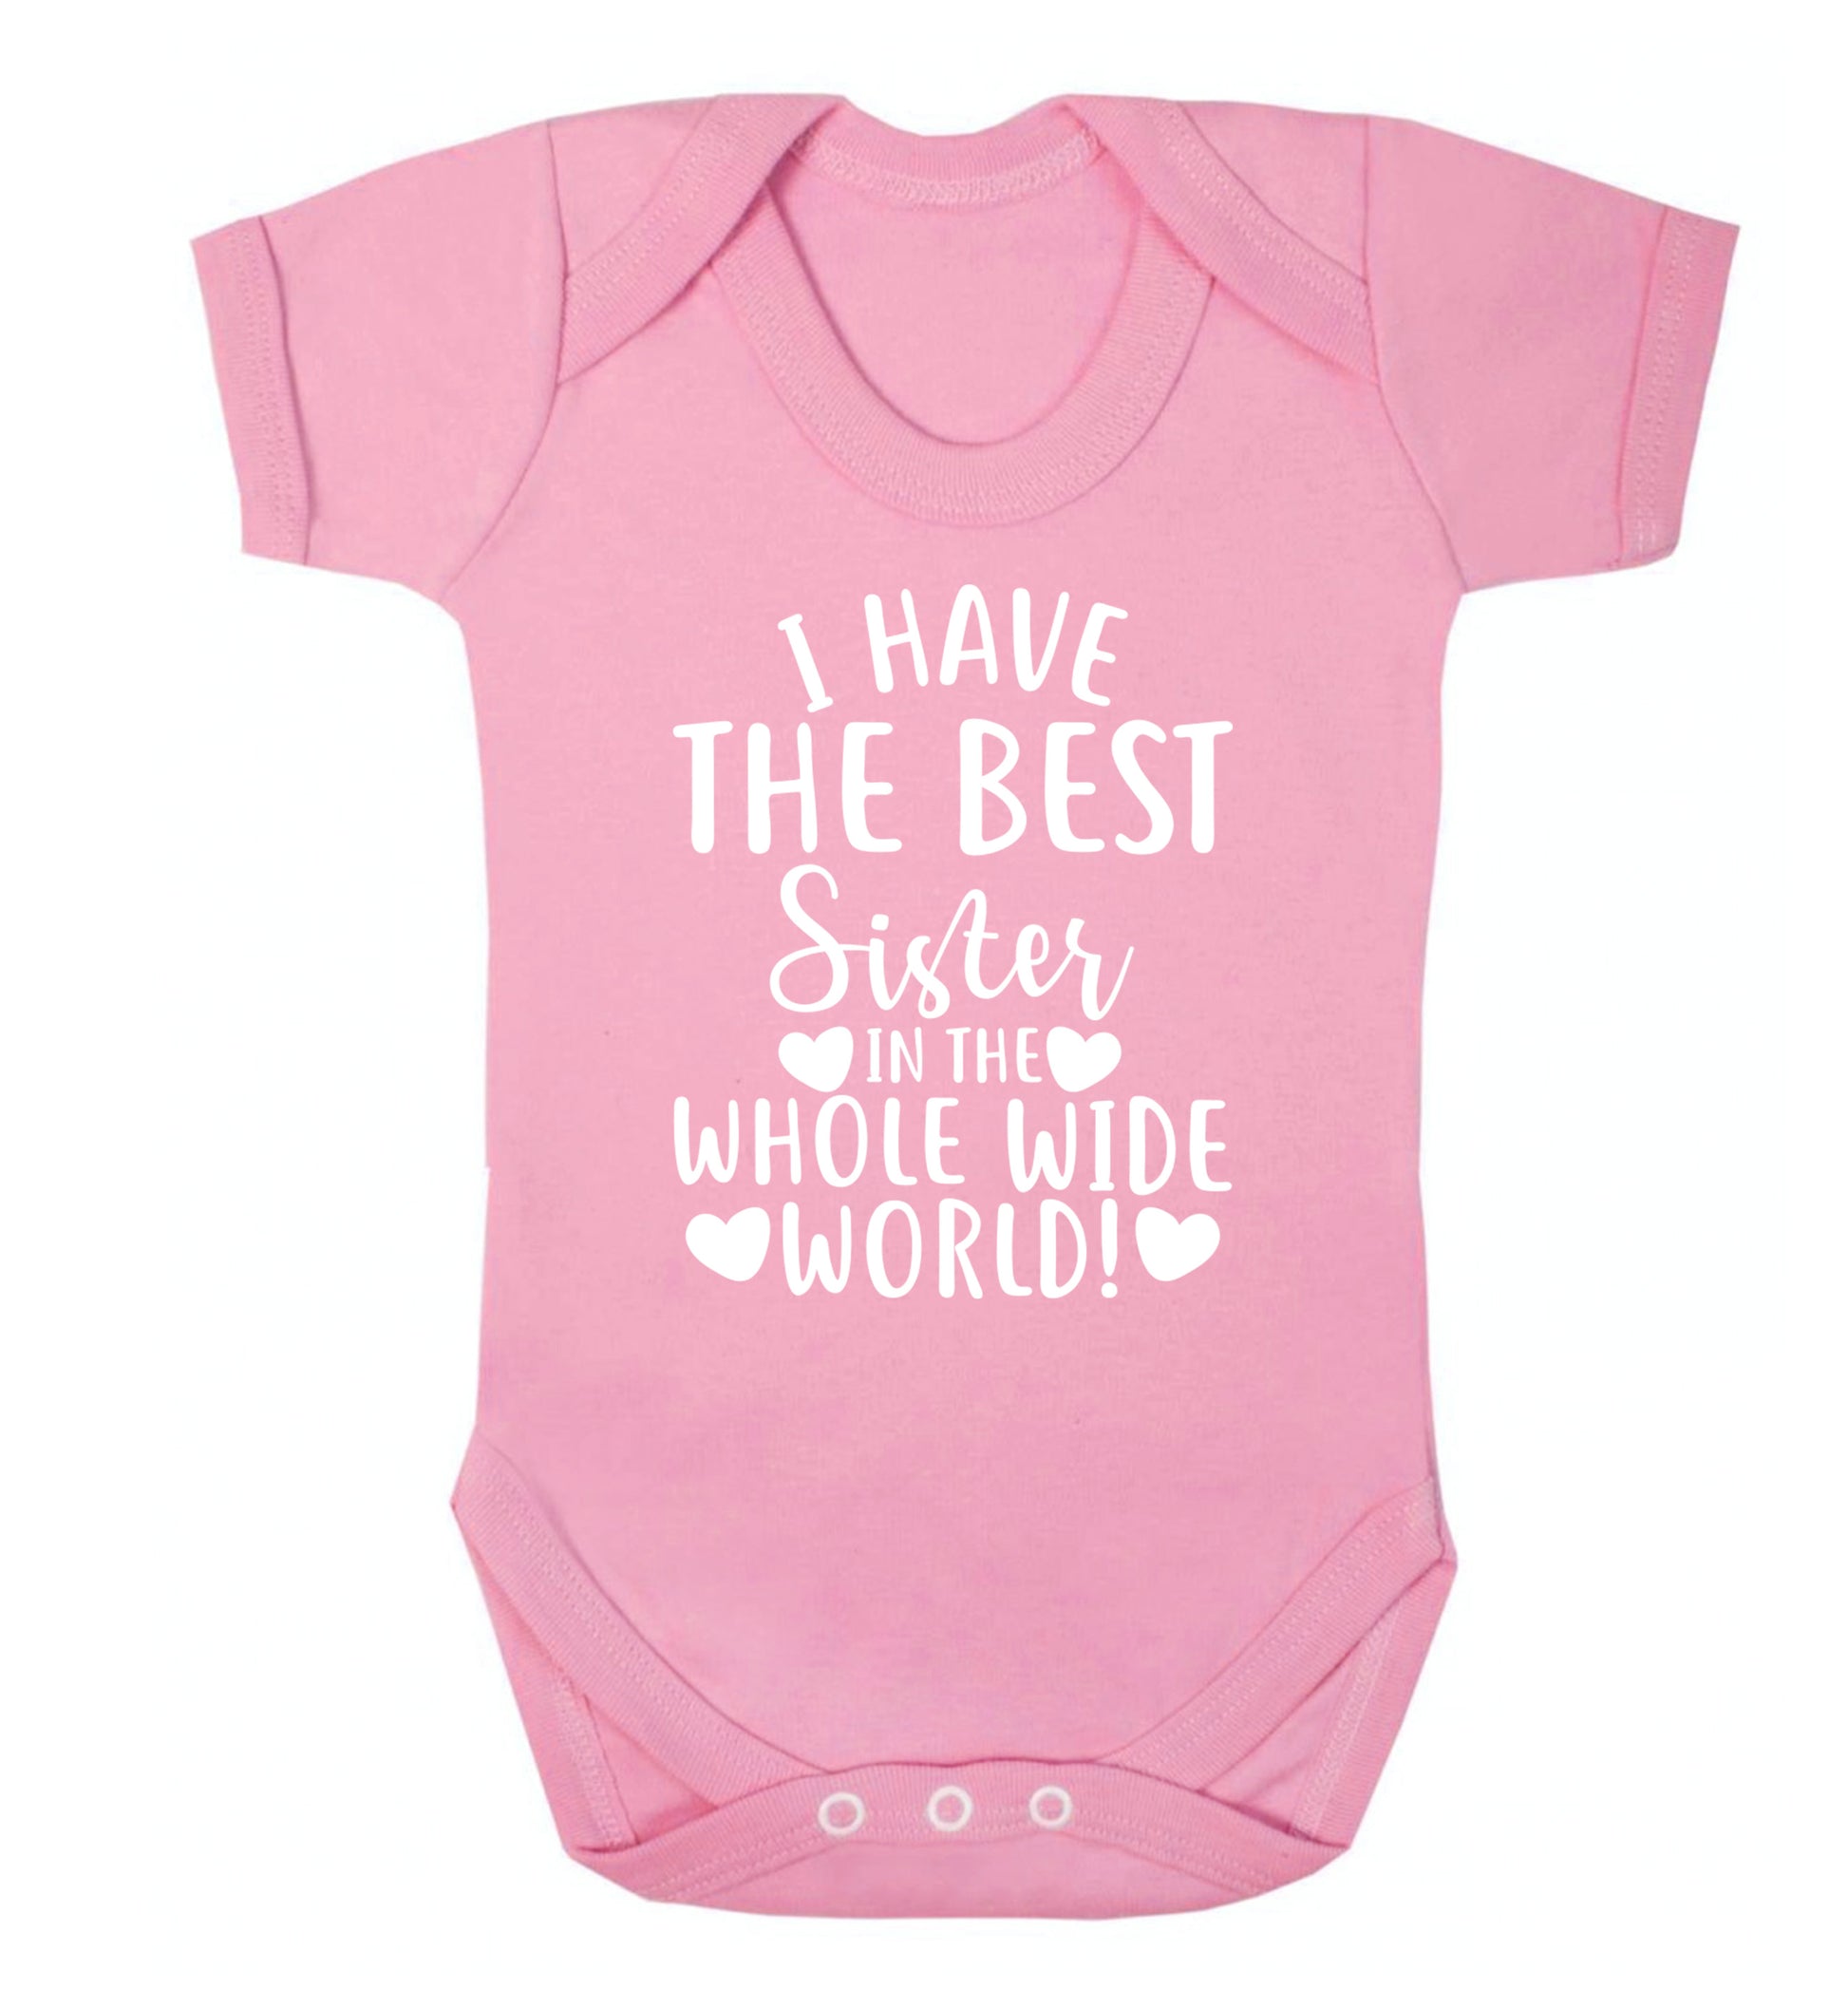 I have the best sister in the whole wide world! Baby Vest pale pink 18-24 months